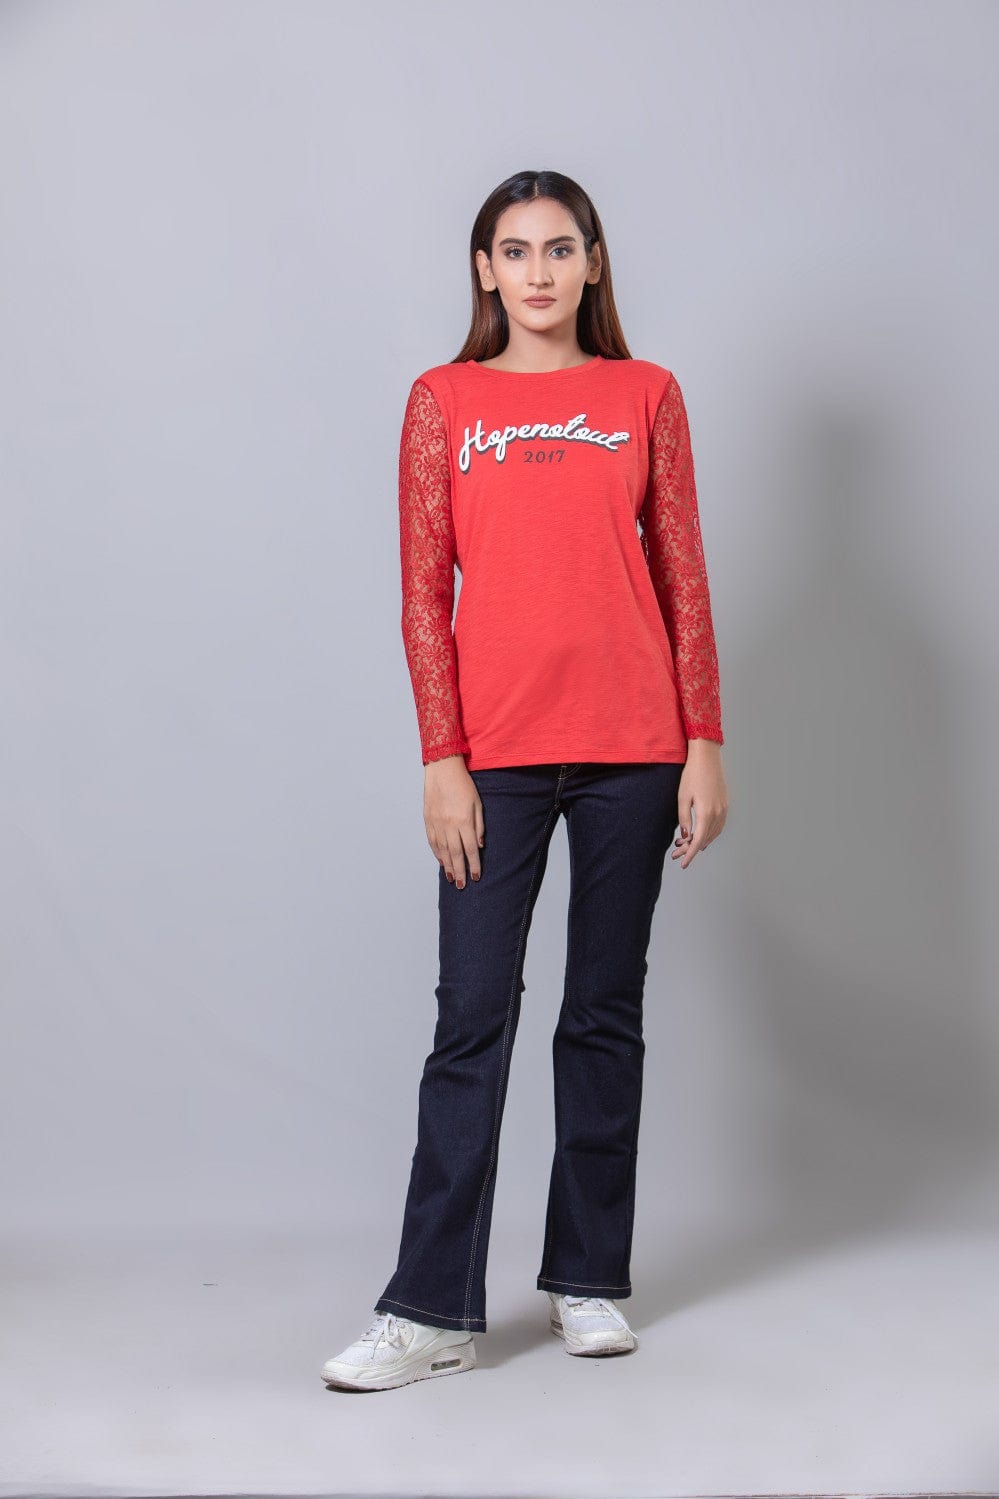 Hope Not Out by Shahid Afridi Women T-SHIRT Red T-Shirt HWKTF20021